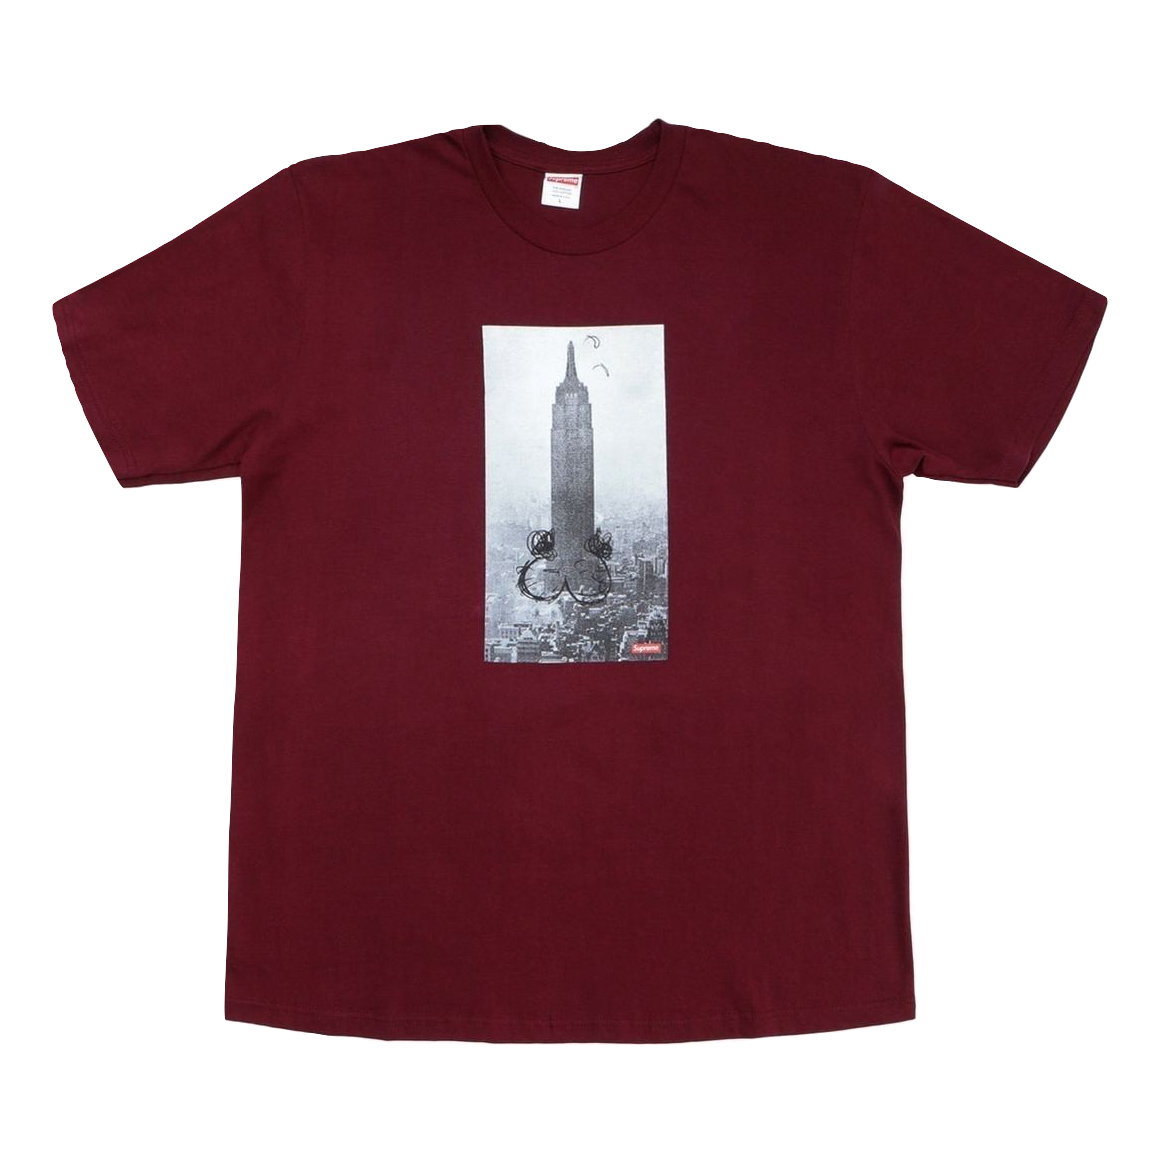 Supreme Mike Kelley The Empire State Building Tee - Burgundy